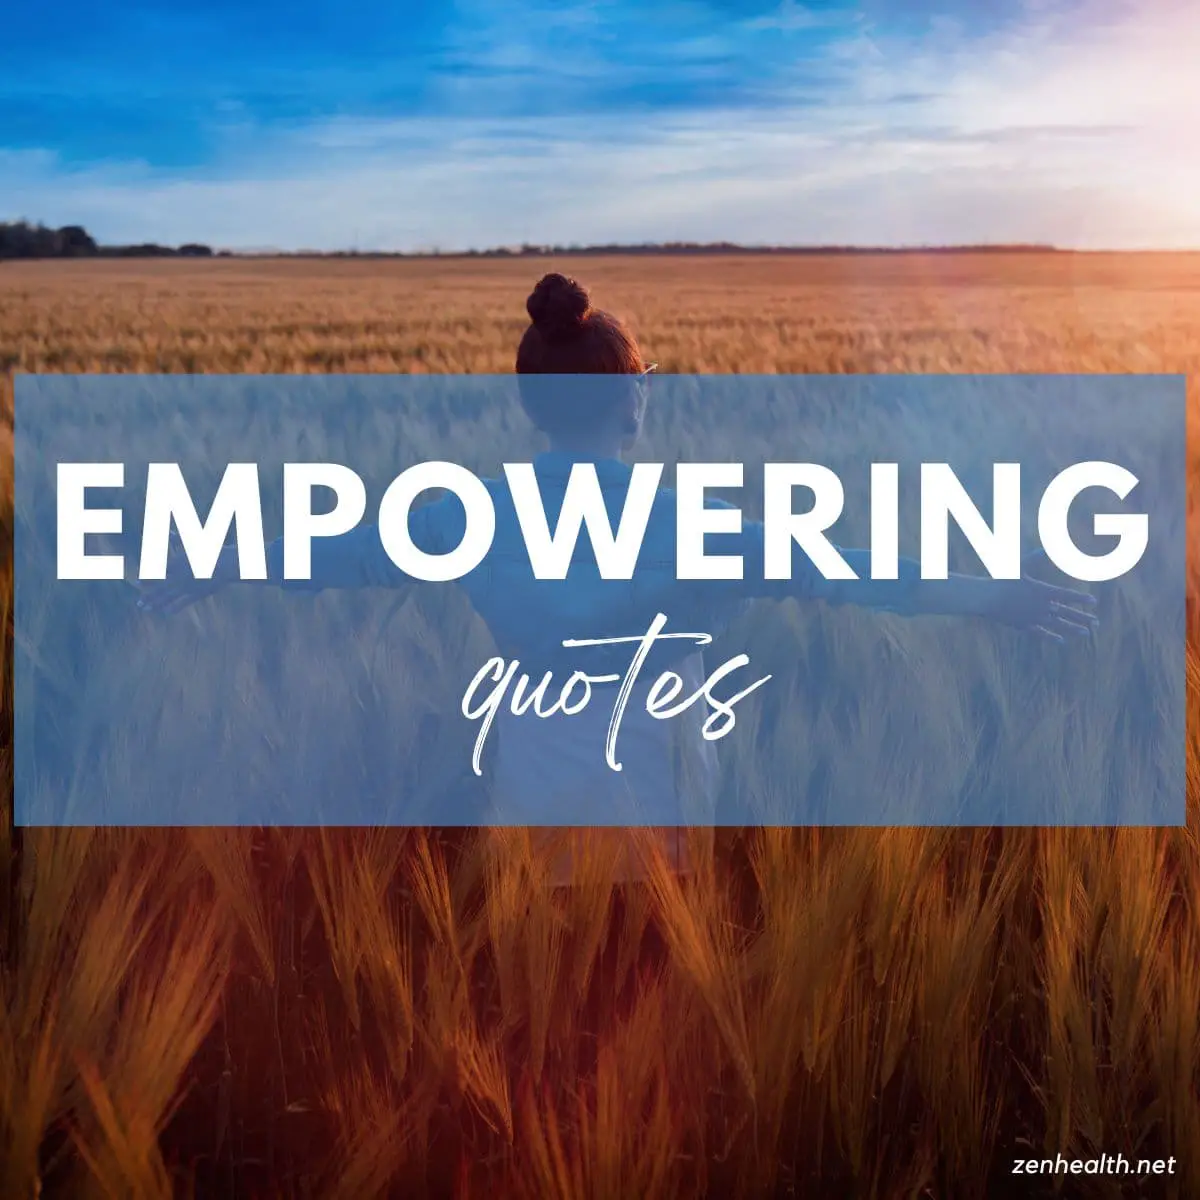 empowering quotes text overlay on a woman in a brown grassy field with the blue sky visible